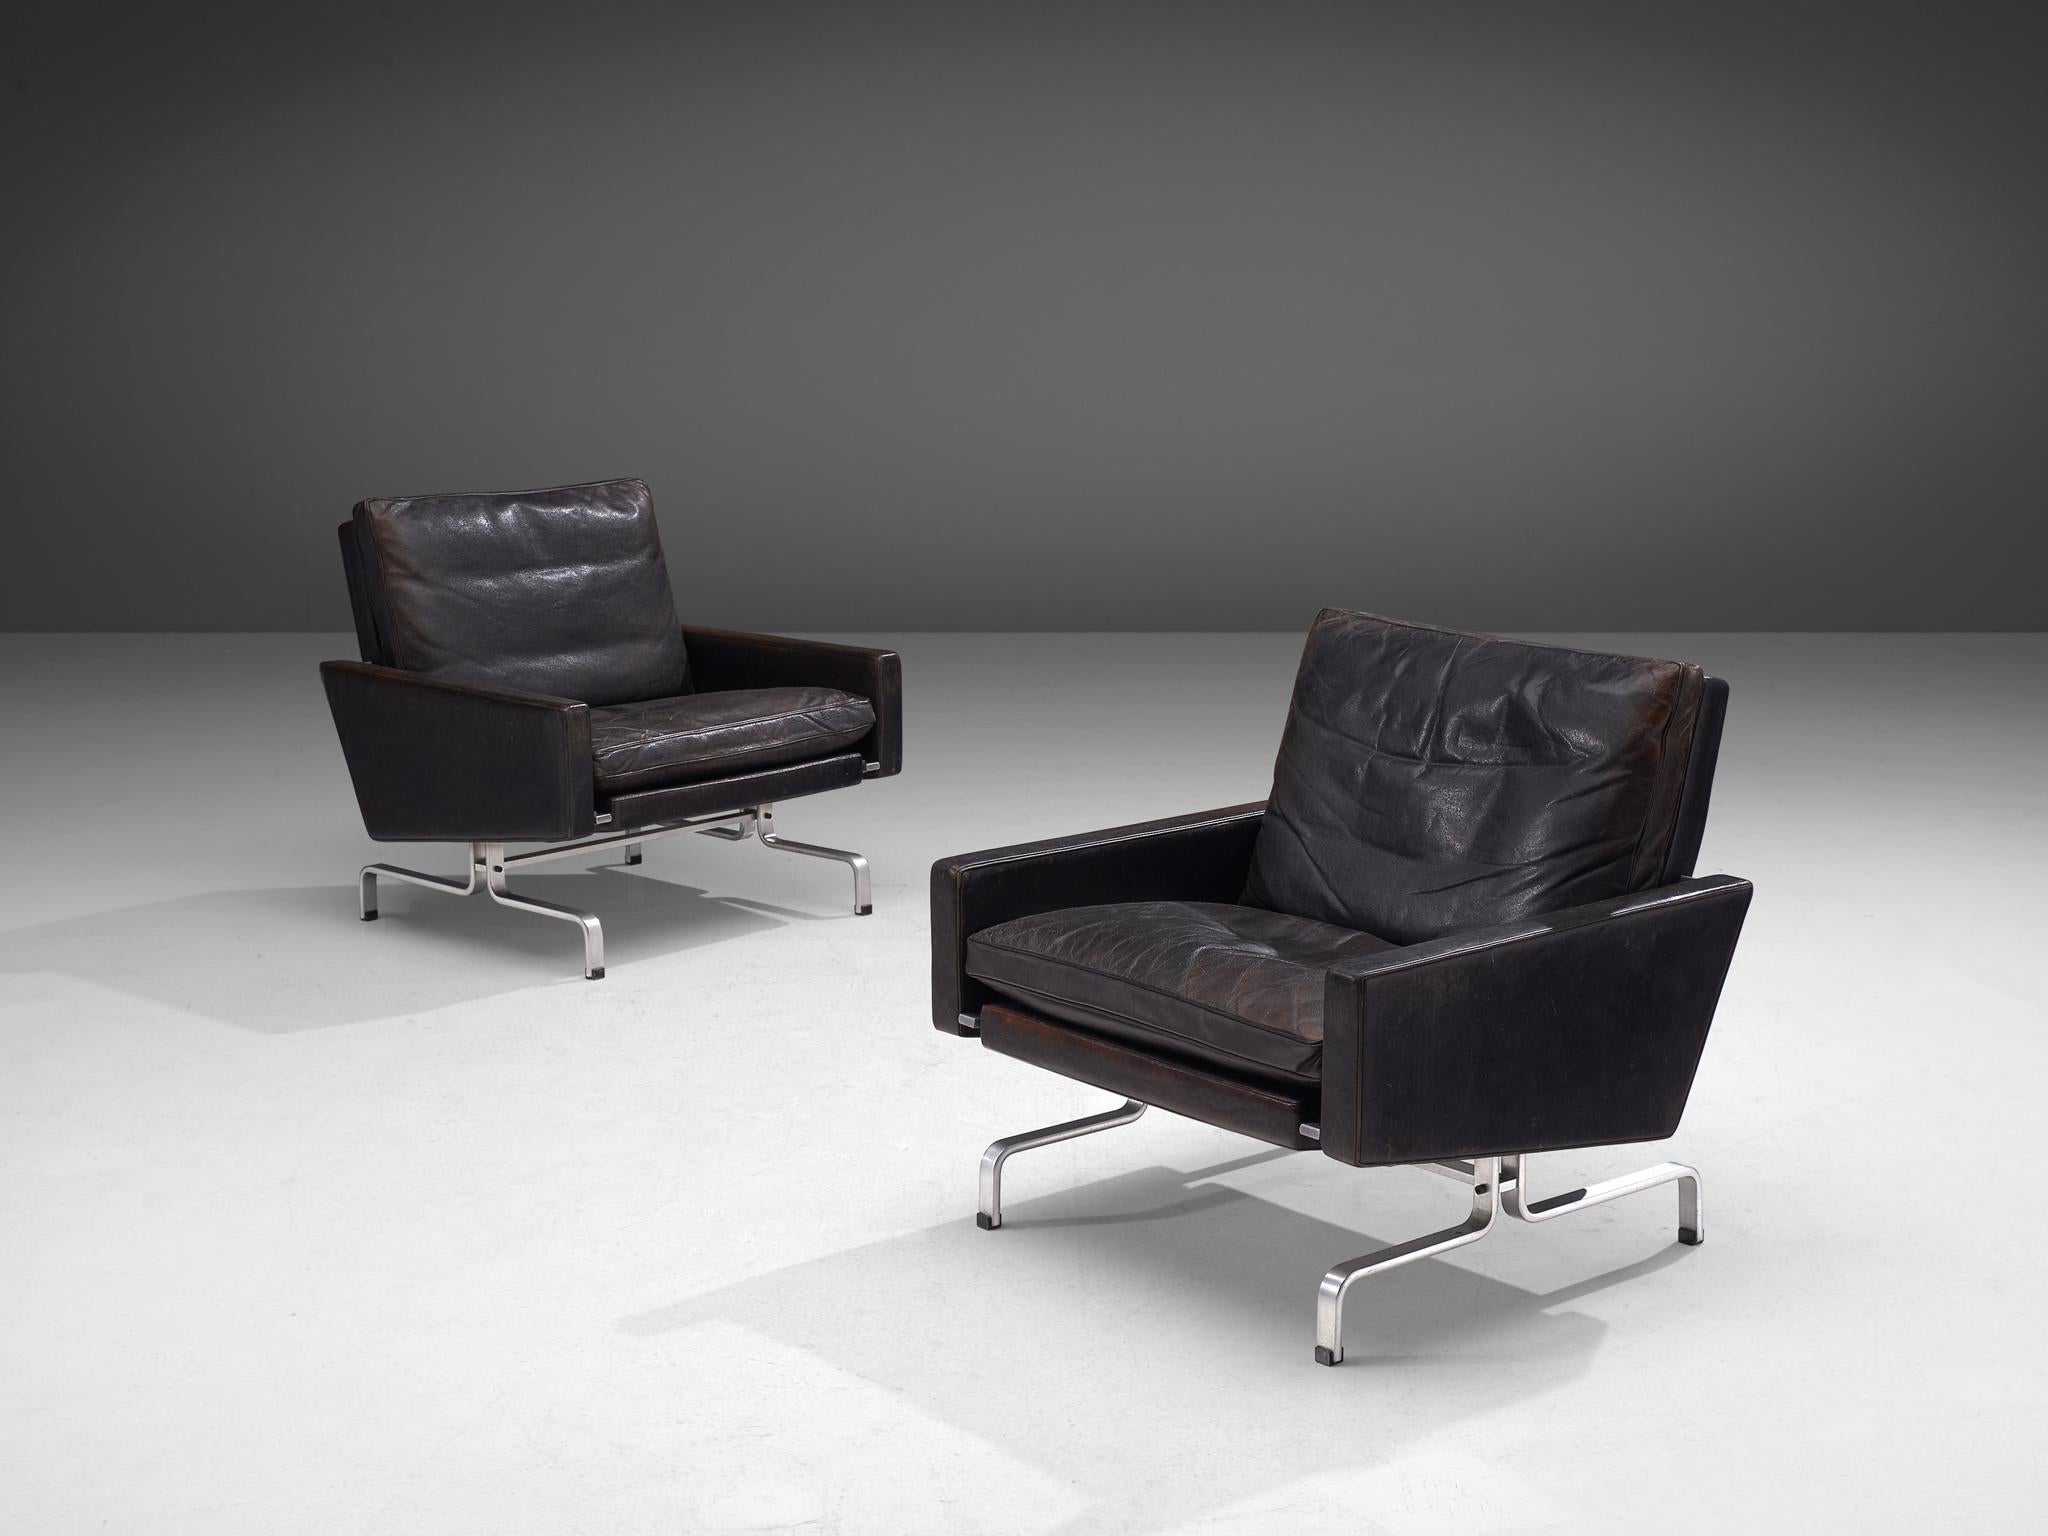 Poul Kjaerholm for E. Kold Christensen, pair of PK 31 lounge chairs, leather and metal, Denmark, 1958.

Beautiful pair of PK31 Lounge chairs in aged black leather by Poul Kjaerholm for E. Kold Christensen. This set of chairs features Poul